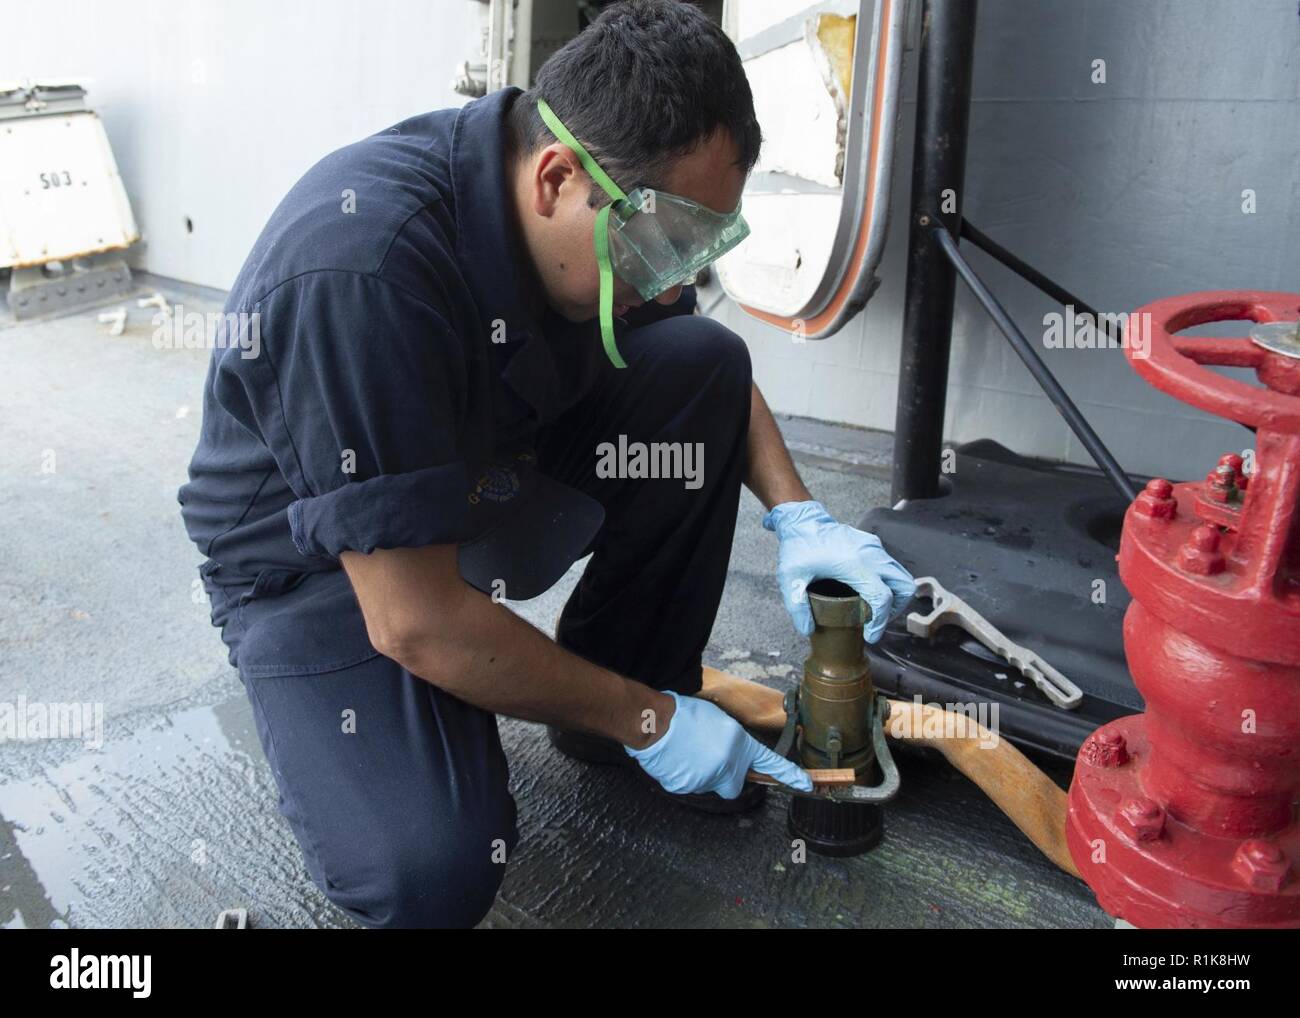 MEDITERRANEAN SEA (Oct. 8, 2018) Seaman Antonio Maldonadovega cleans a vari-nozzle aboard the Arleigh Burke-class guided-missile destroyer USS Arleigh Burke (DDG 51) in the Mediterranean Sea Oct. 8, 2018. Arleigh Burke, homeported at Naval Station Norfolk, is conducting naval operations in the U.S. 6th Fleet area of operations in support of U.S. national security interests in Europe and Africa. Stock Photo